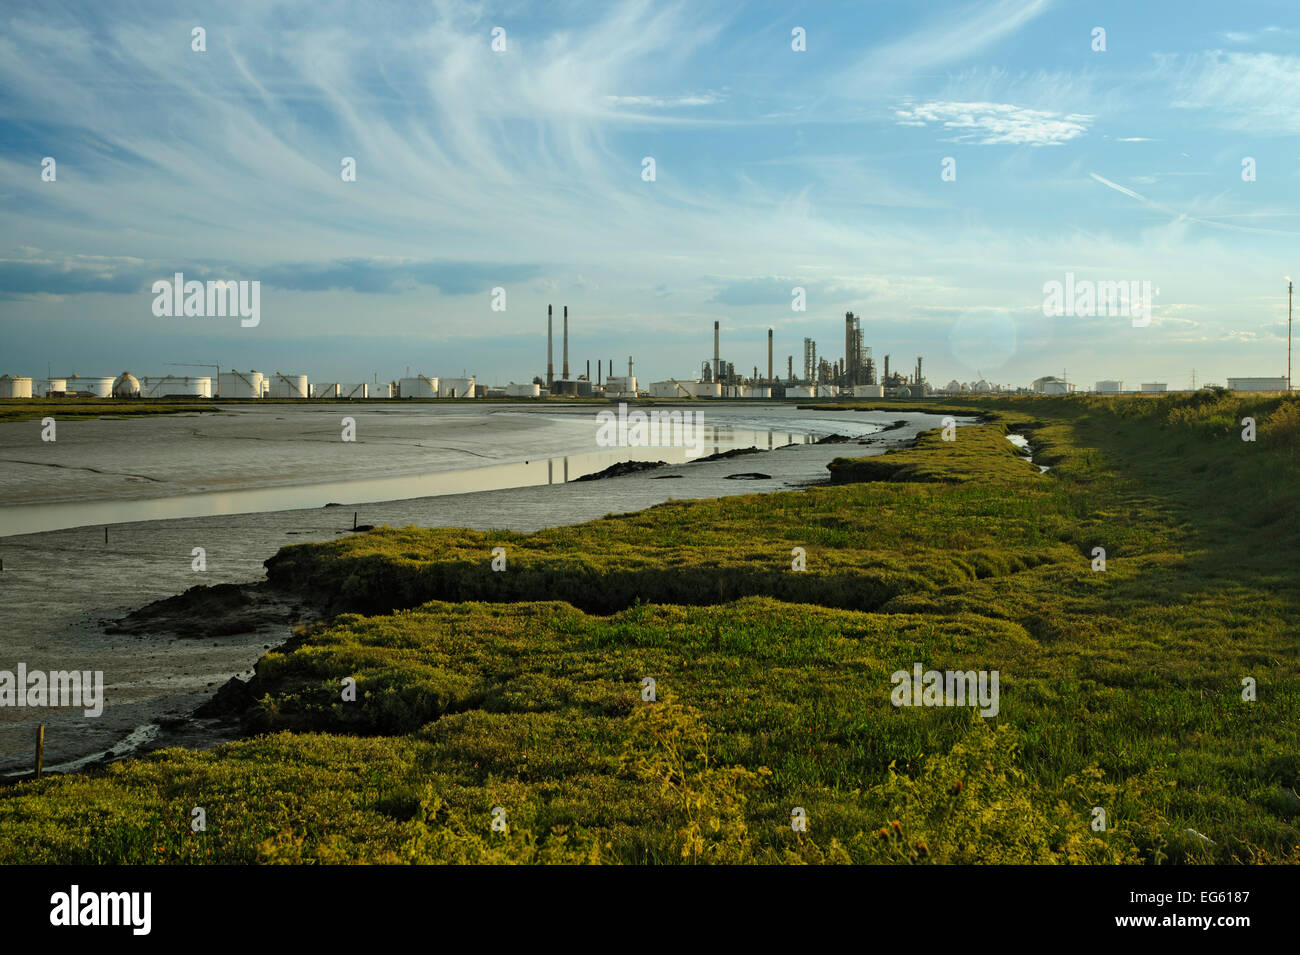 Edge of saltmarsh with oil storage depot in the background, Canvey Island, Essex, England, UK, February Stock Photo